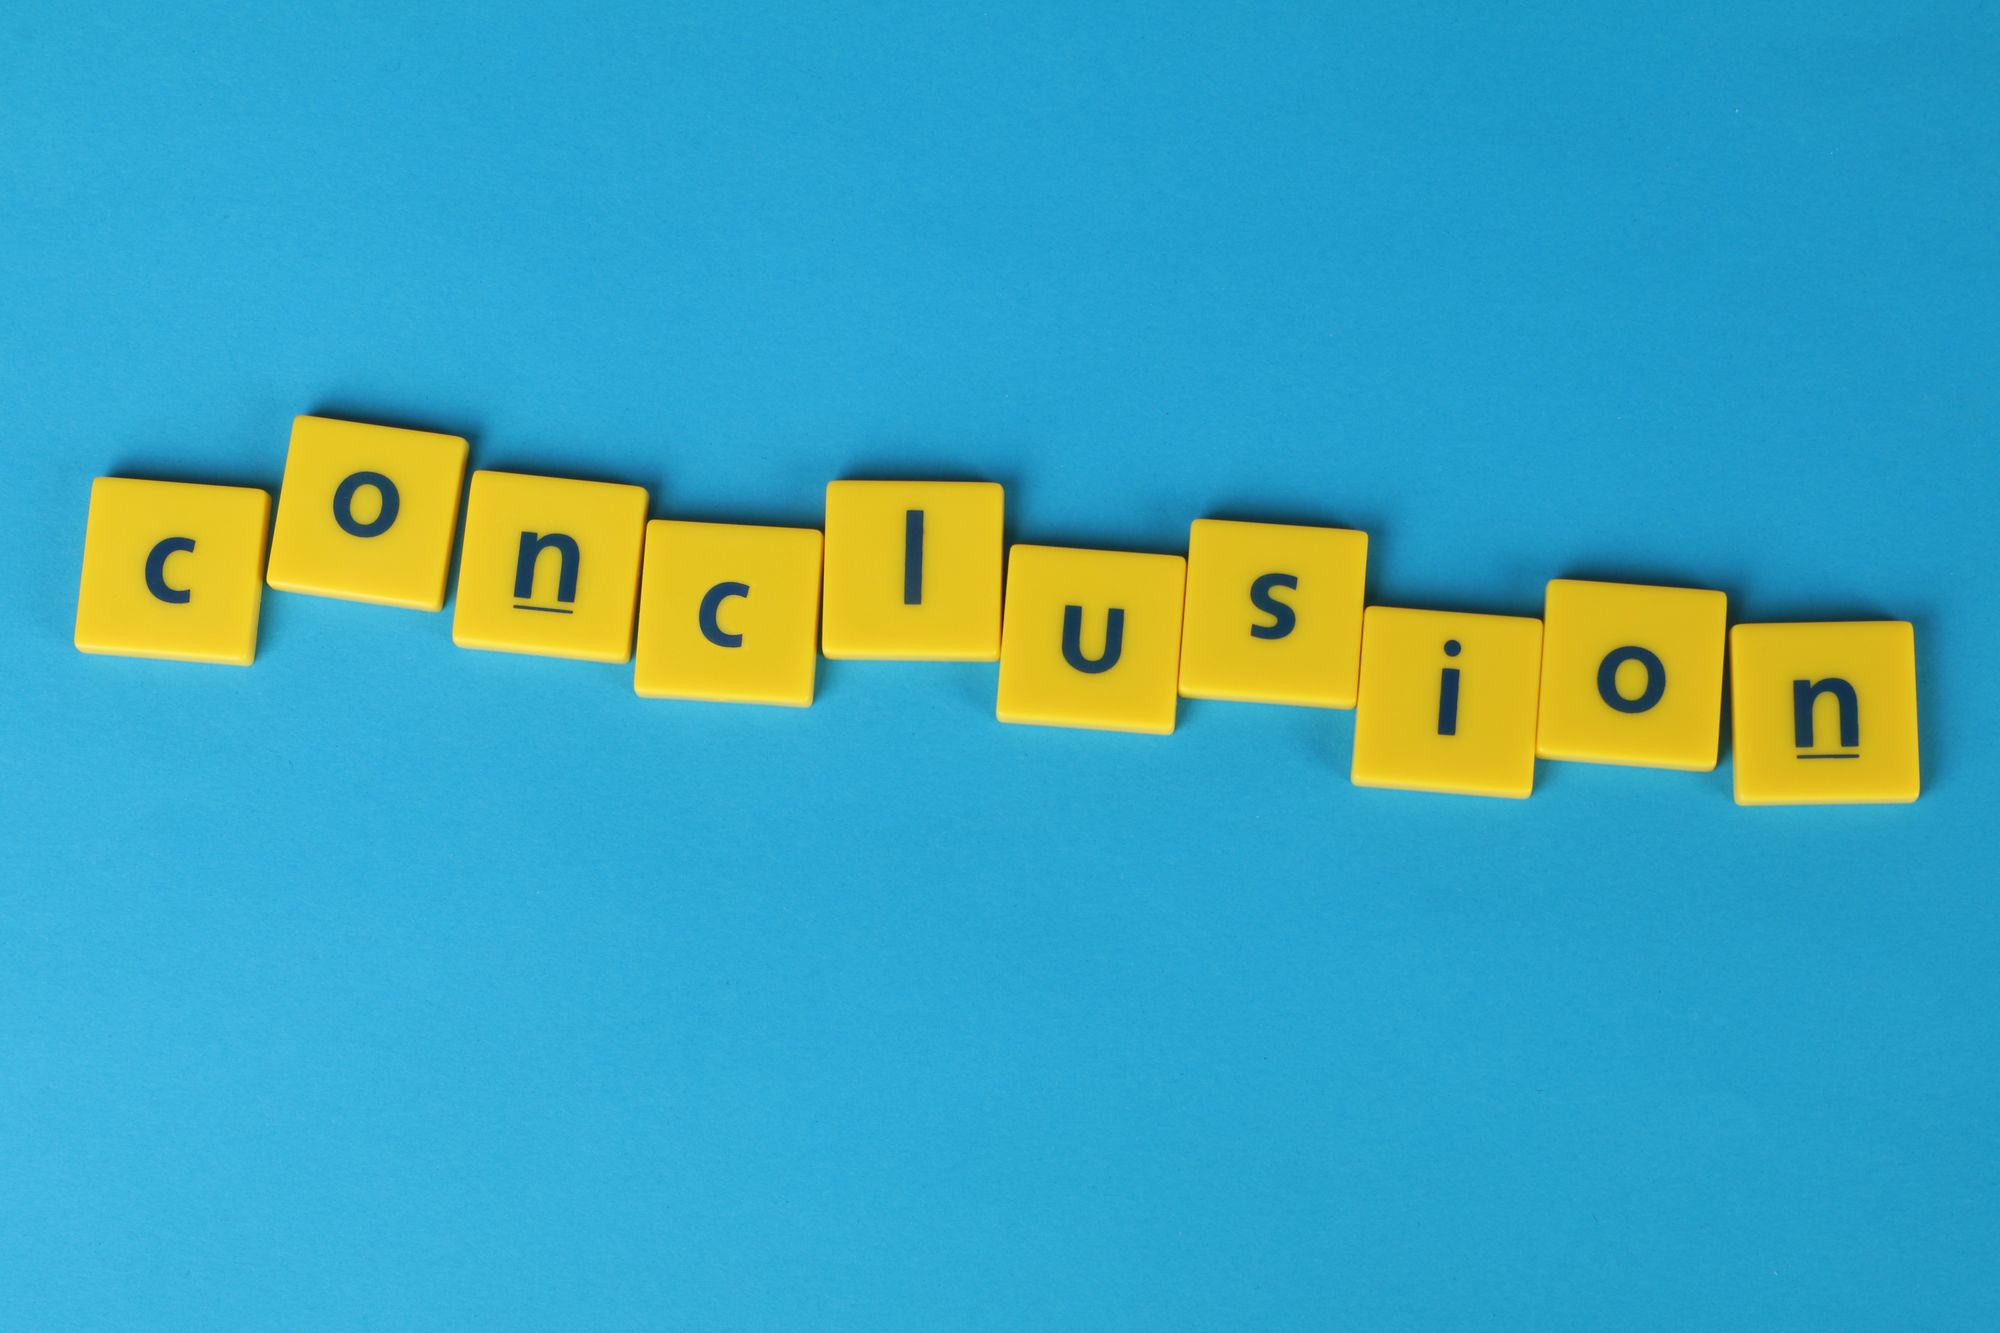 Image showing tiles spelling out "conclusion"